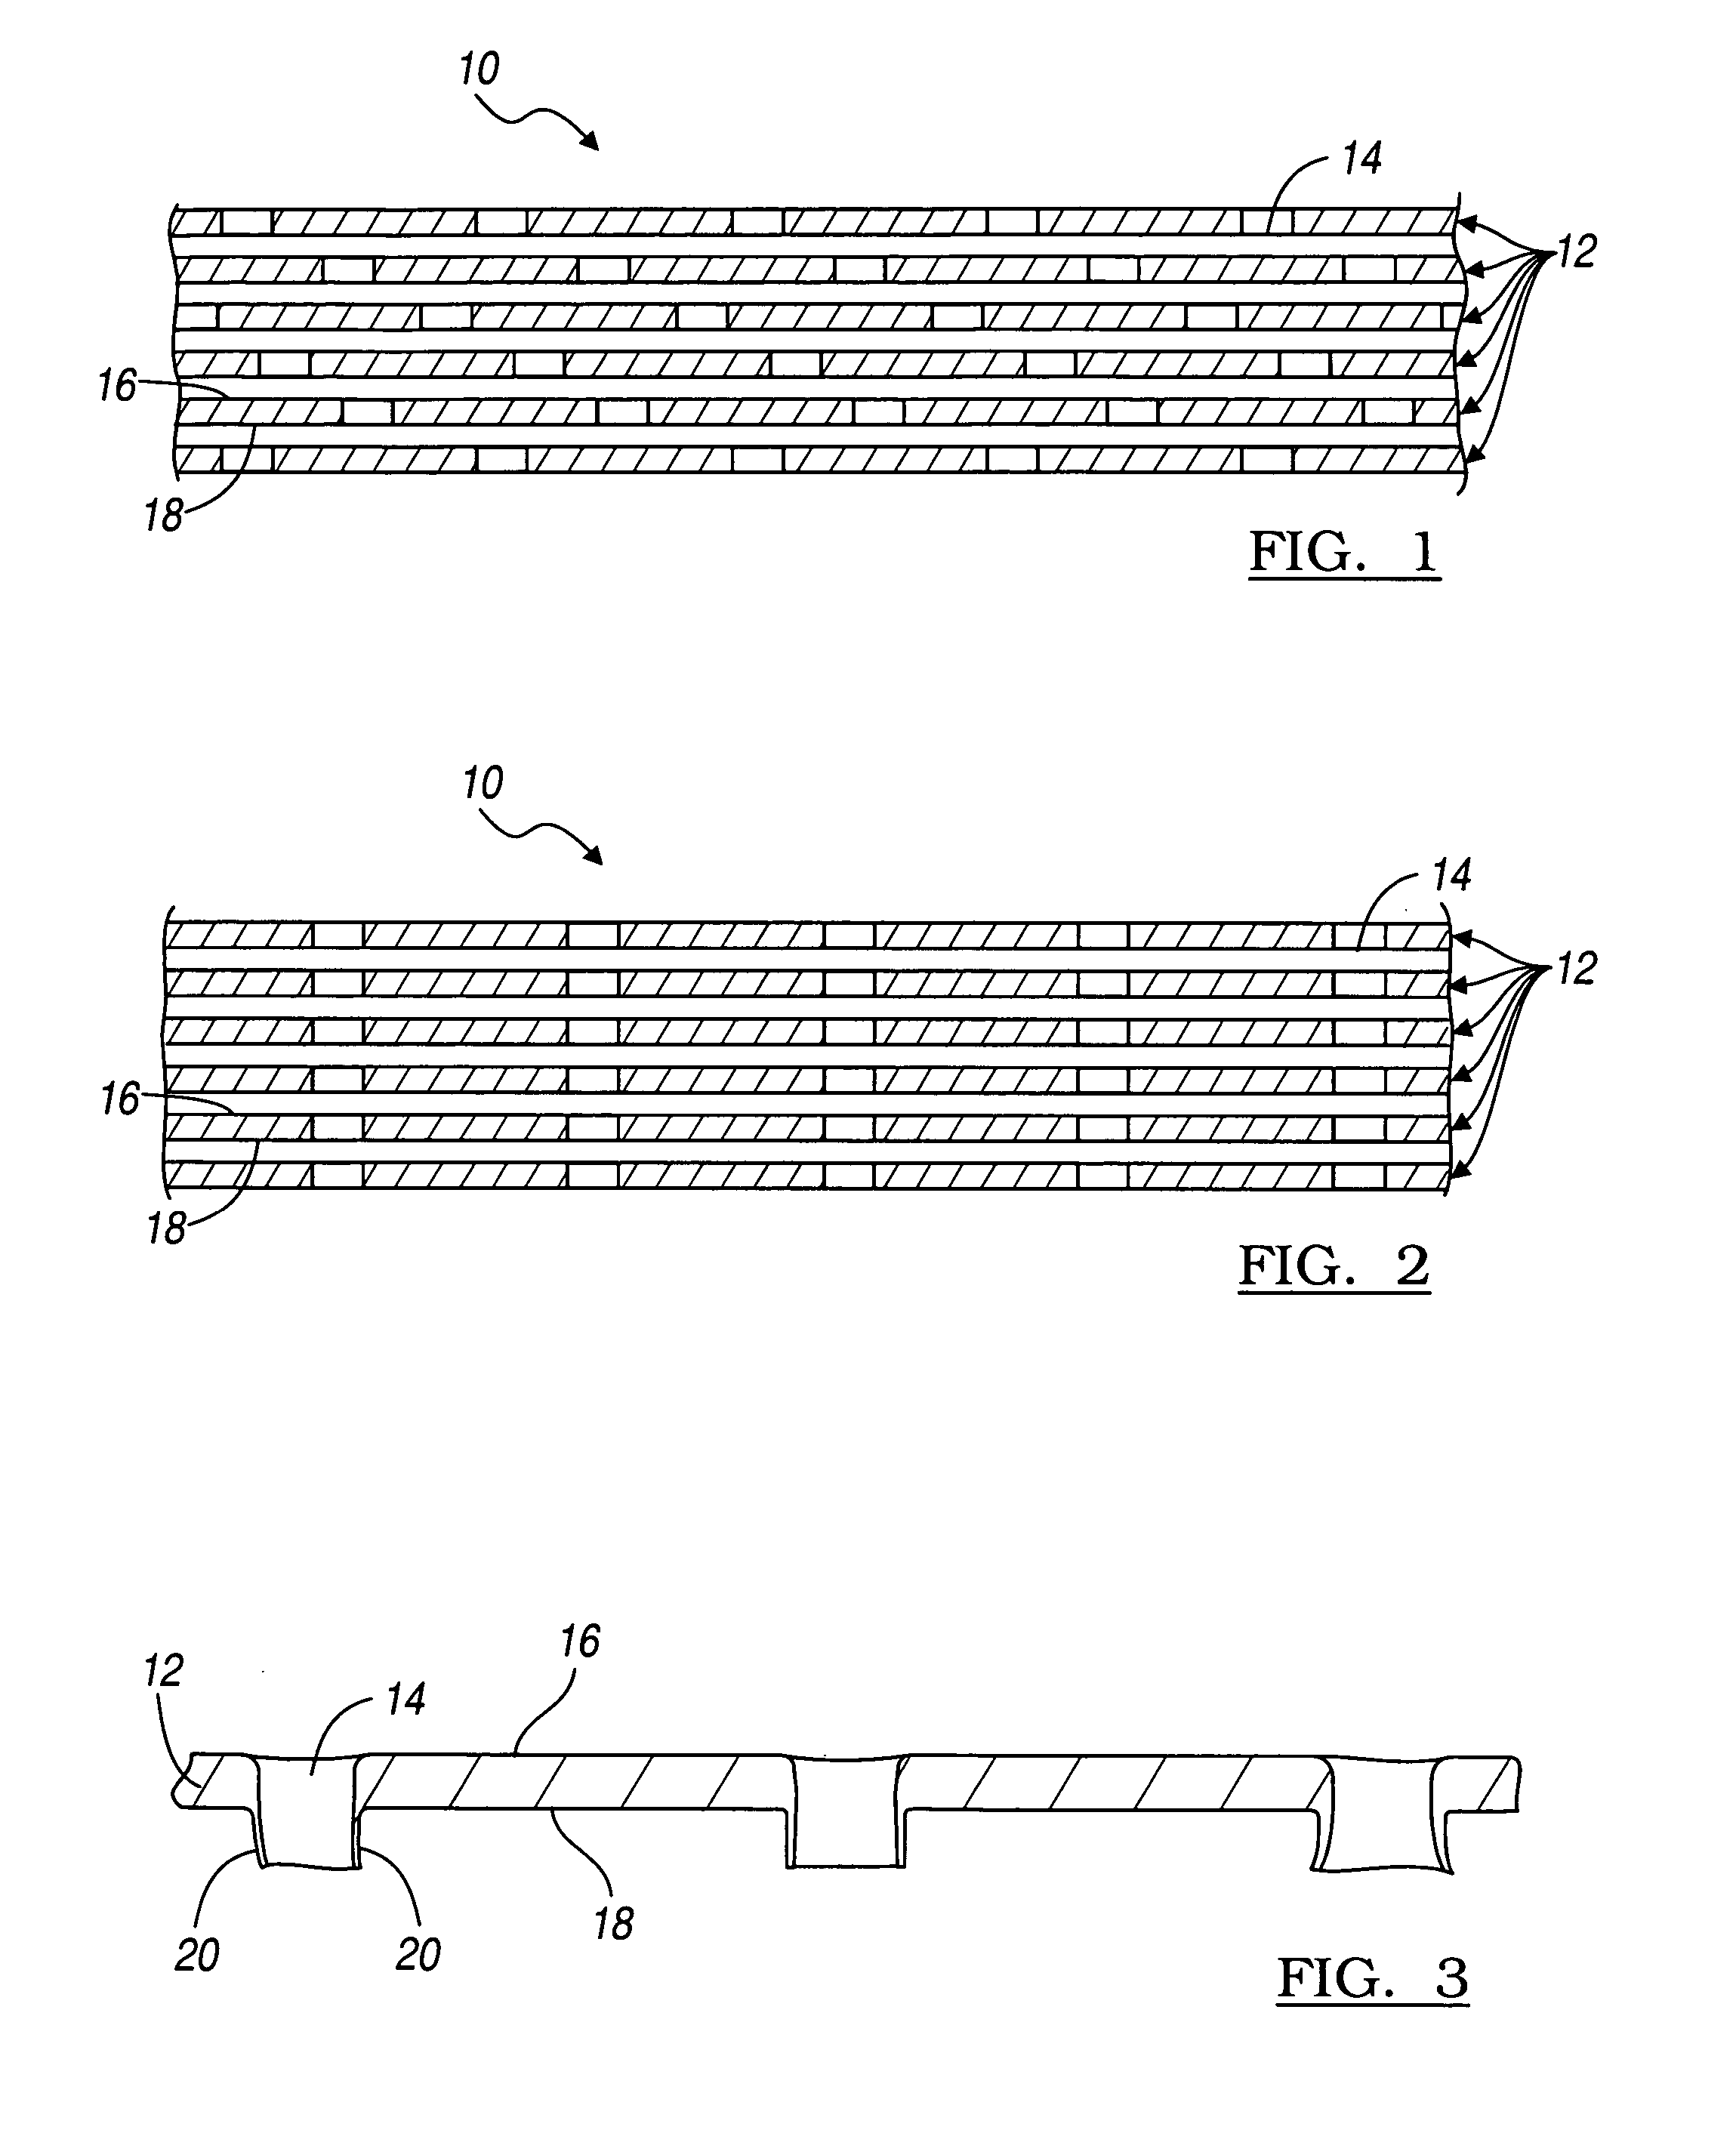 Multilayer microperforated implant